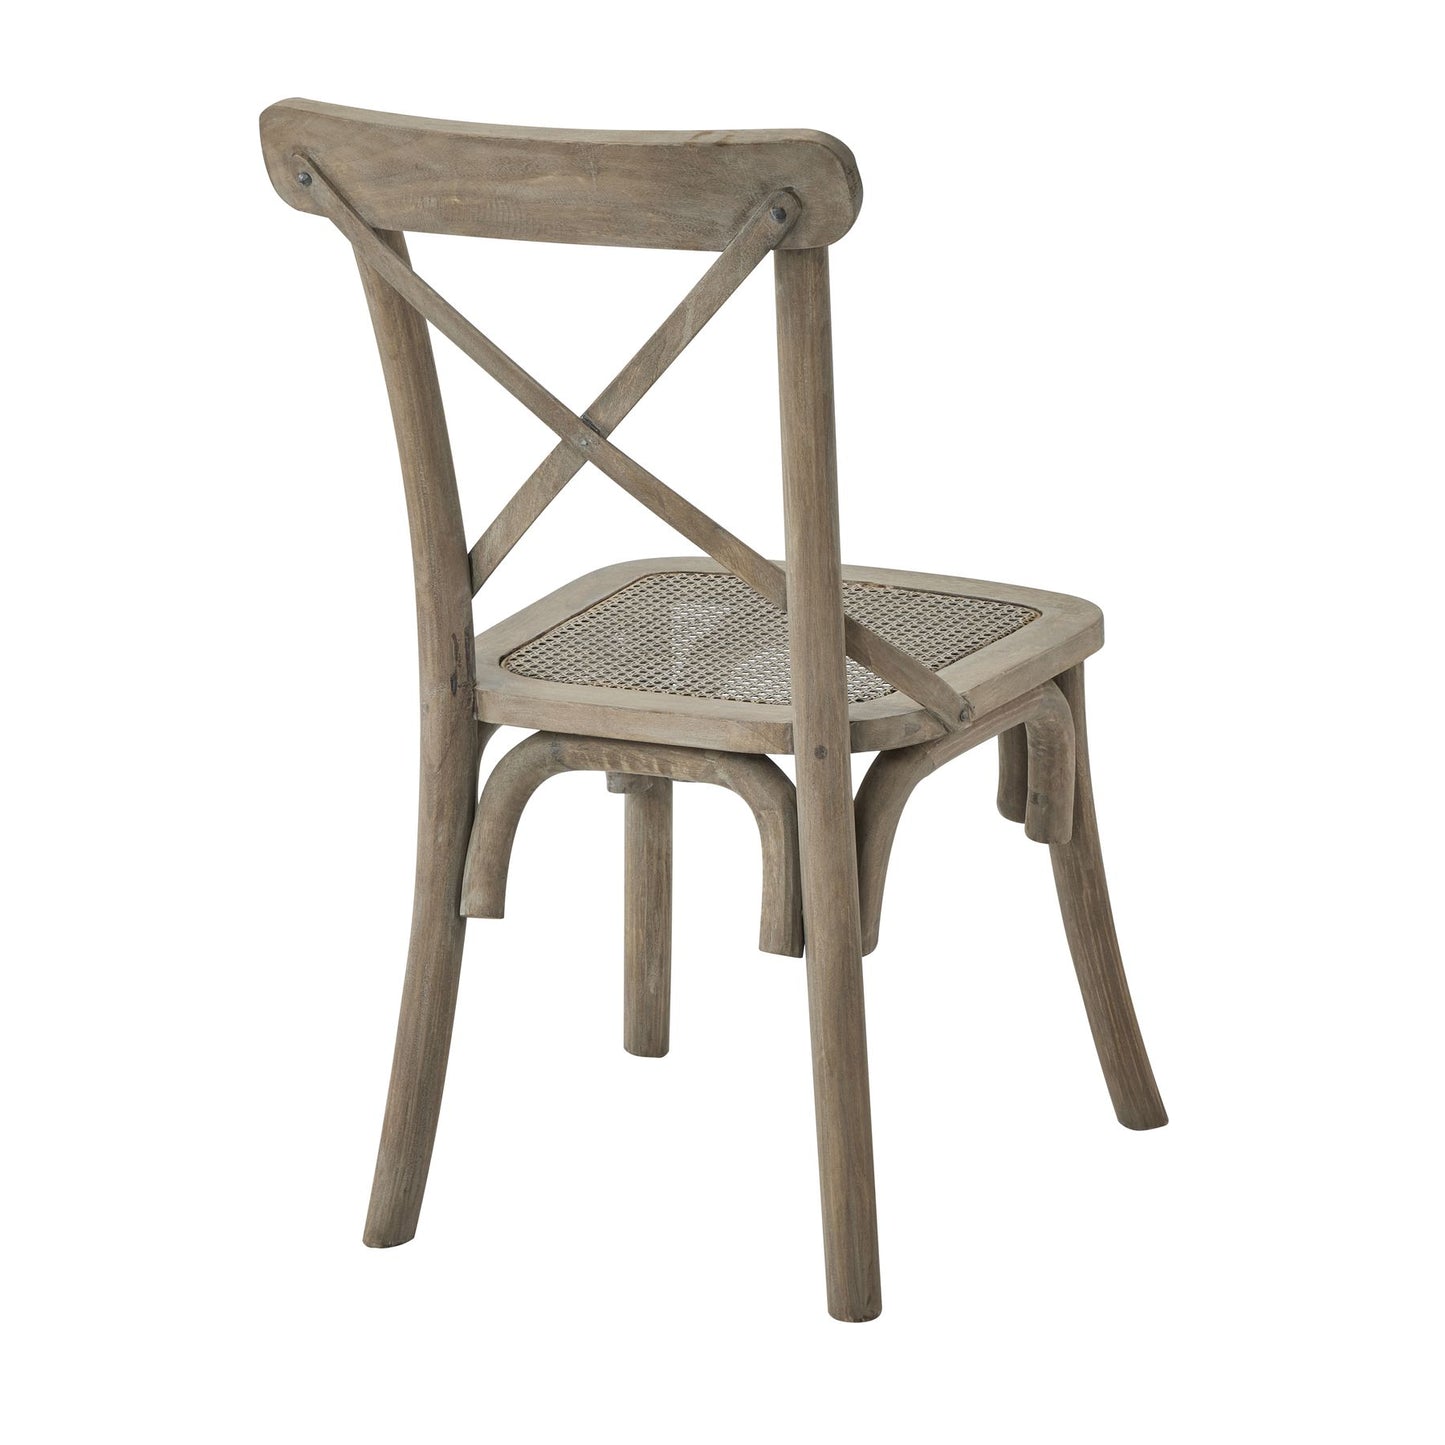 Chateau Cross Back Dining Chair